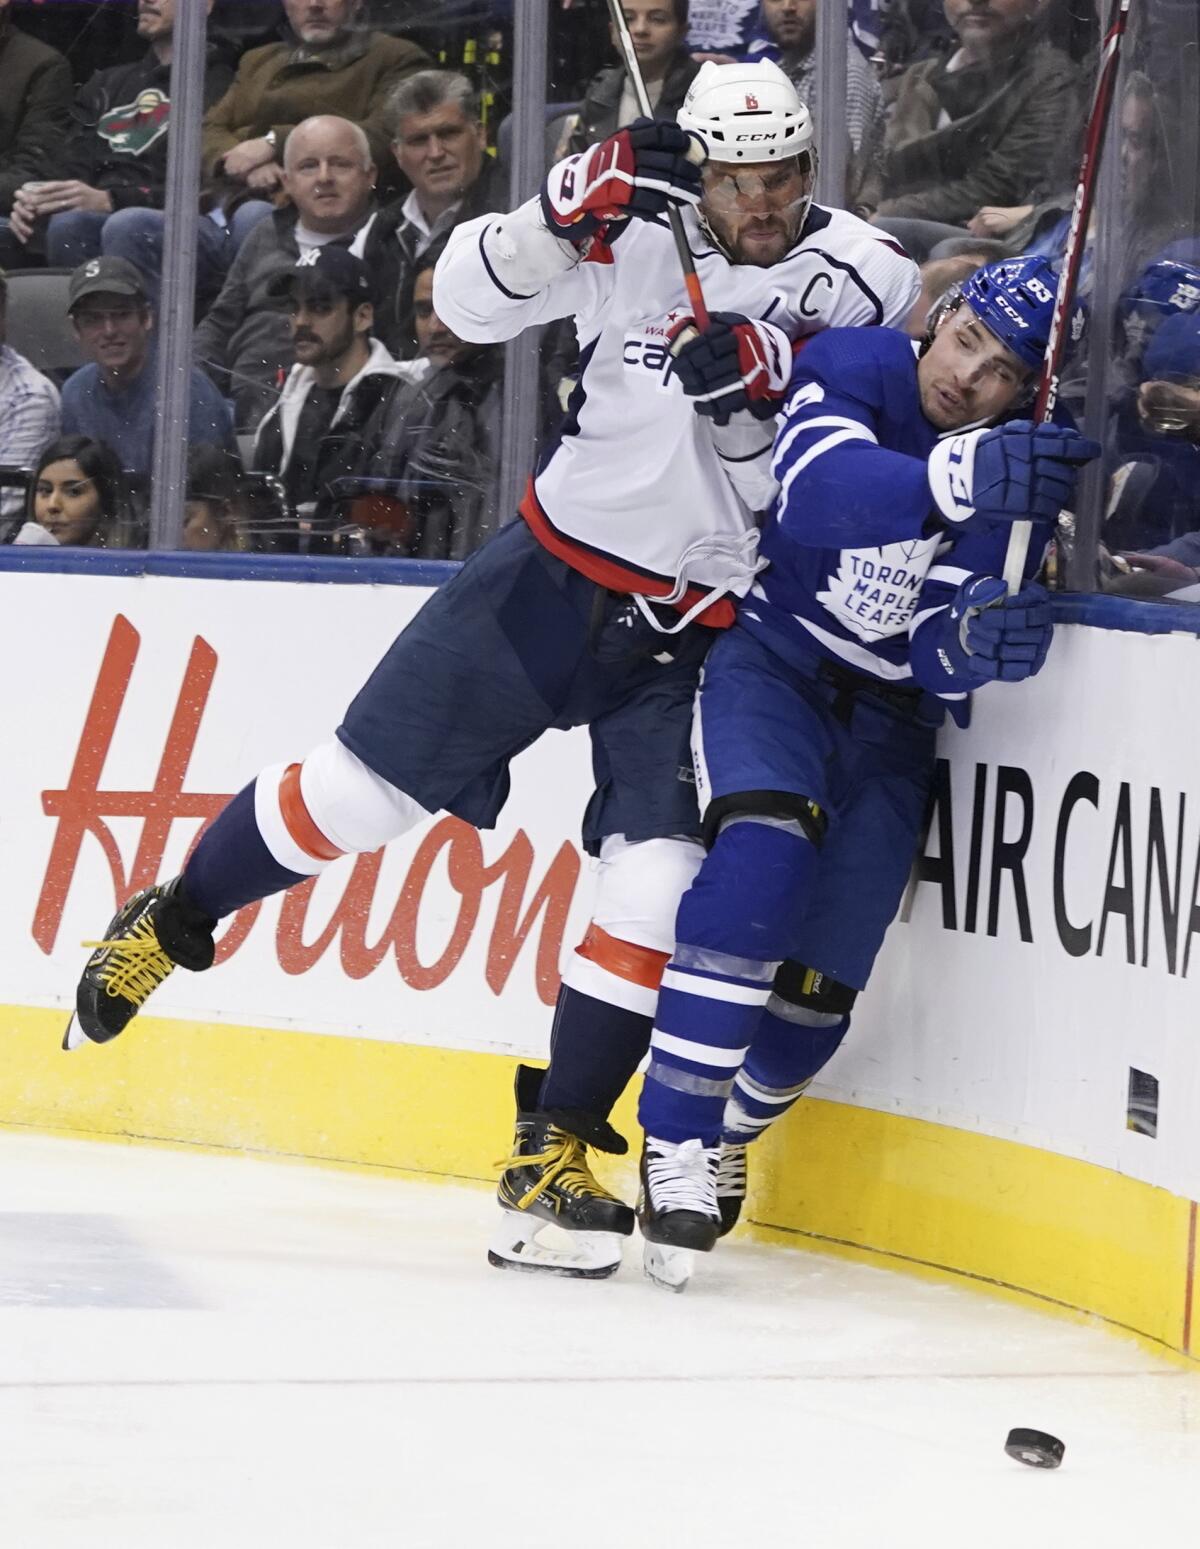 Capitals left wing Alex Ovechkin (8) checks Maple Leafs defenseman Cody Ceci (83) into the boards during a game at Scotiabank Arena.